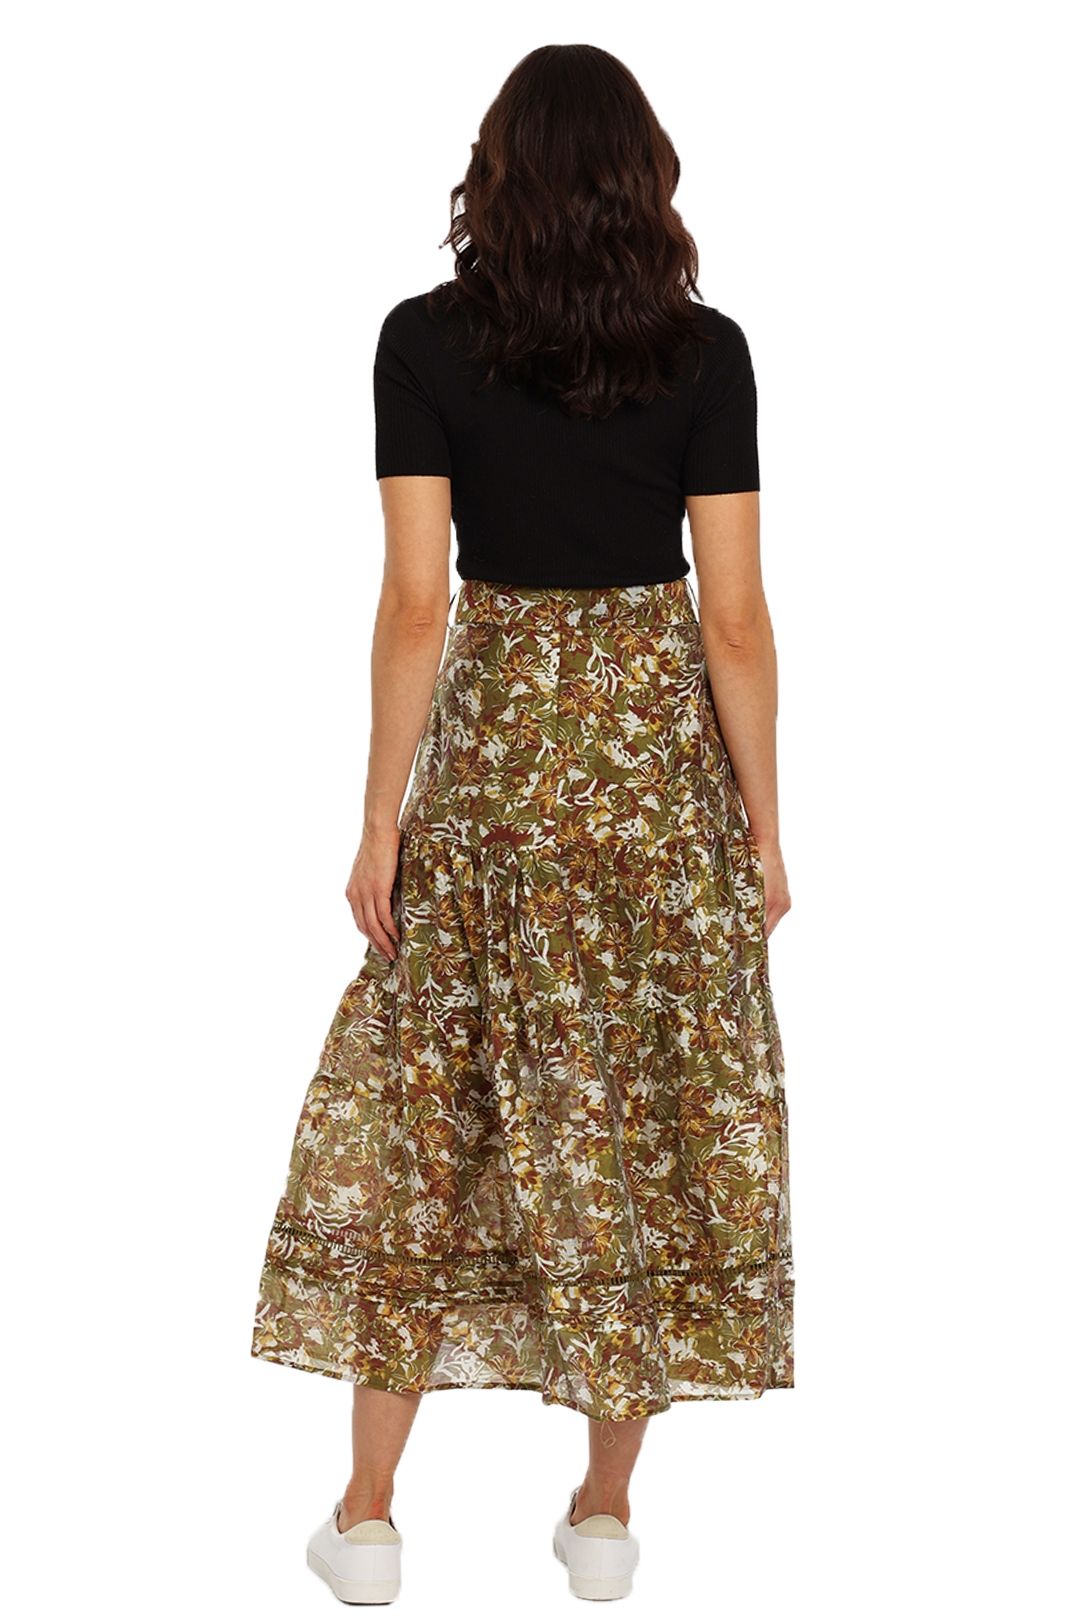 Ministry of Style Floral In Disguise Midi Skirt high